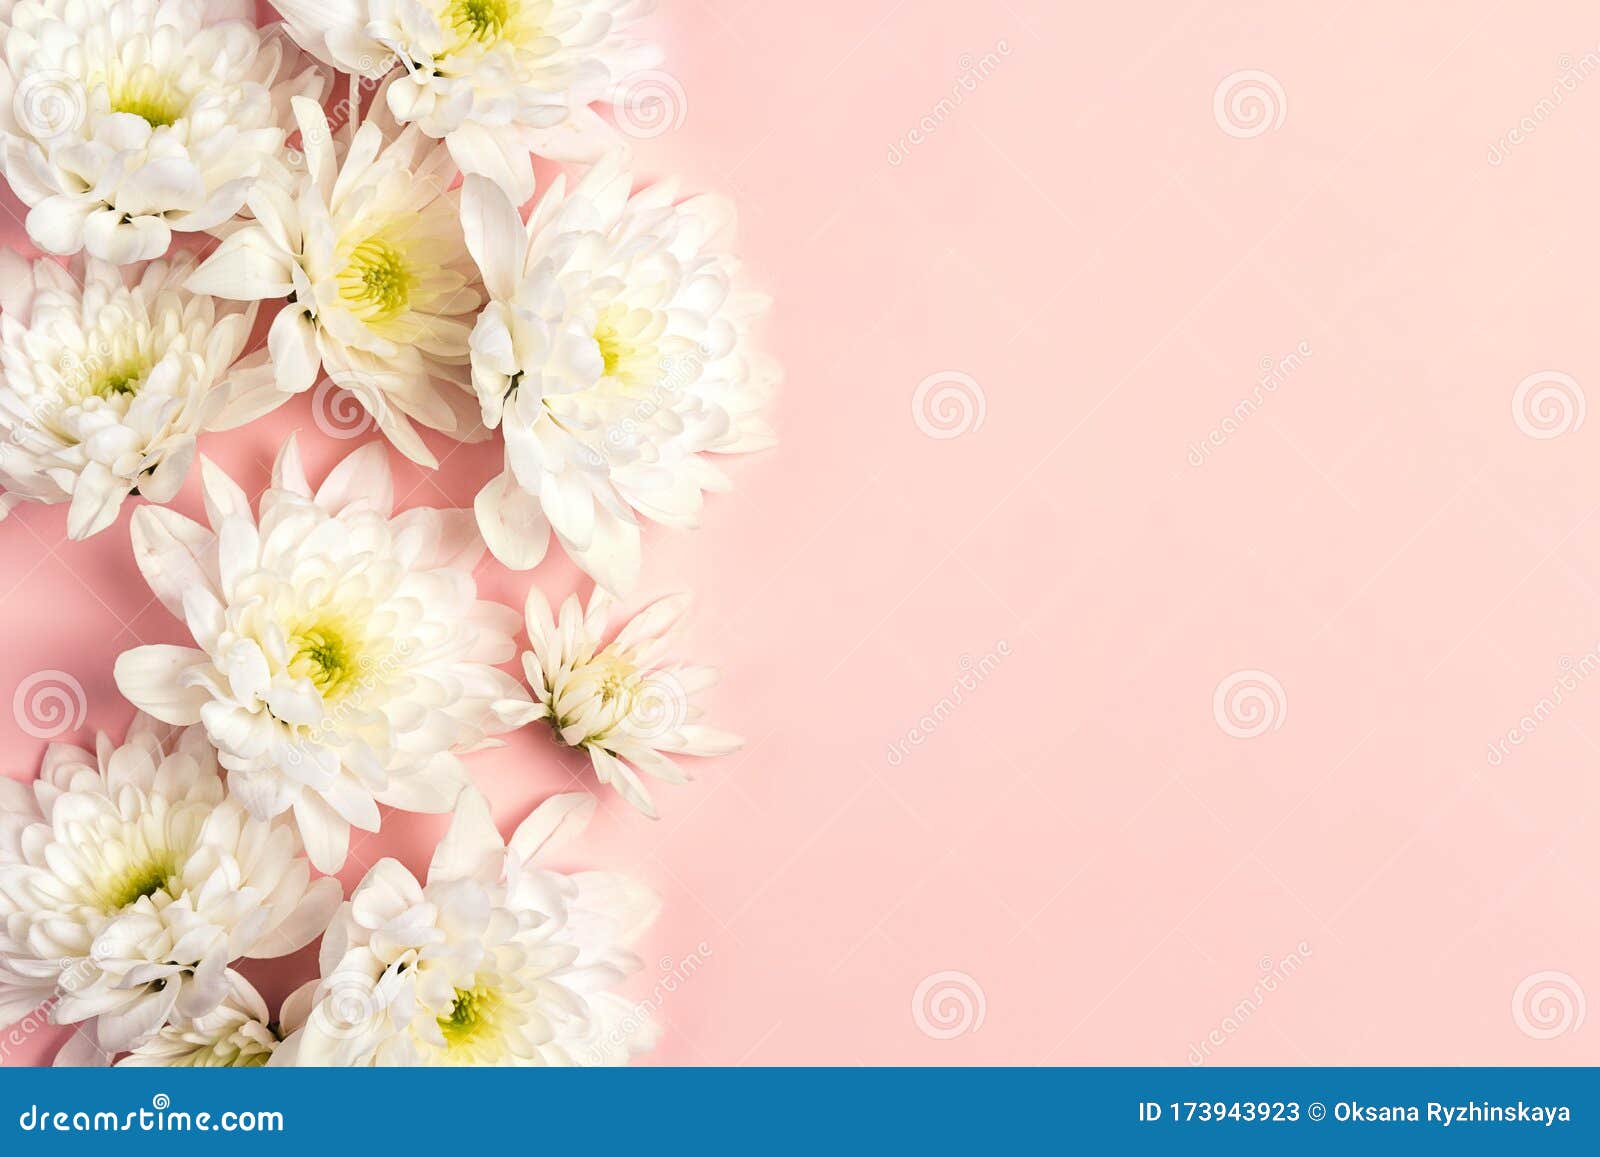 Border Of Chrysanthemum Flowers On A Pink Background Stock Image Image Of Blossom Decoration 173943923